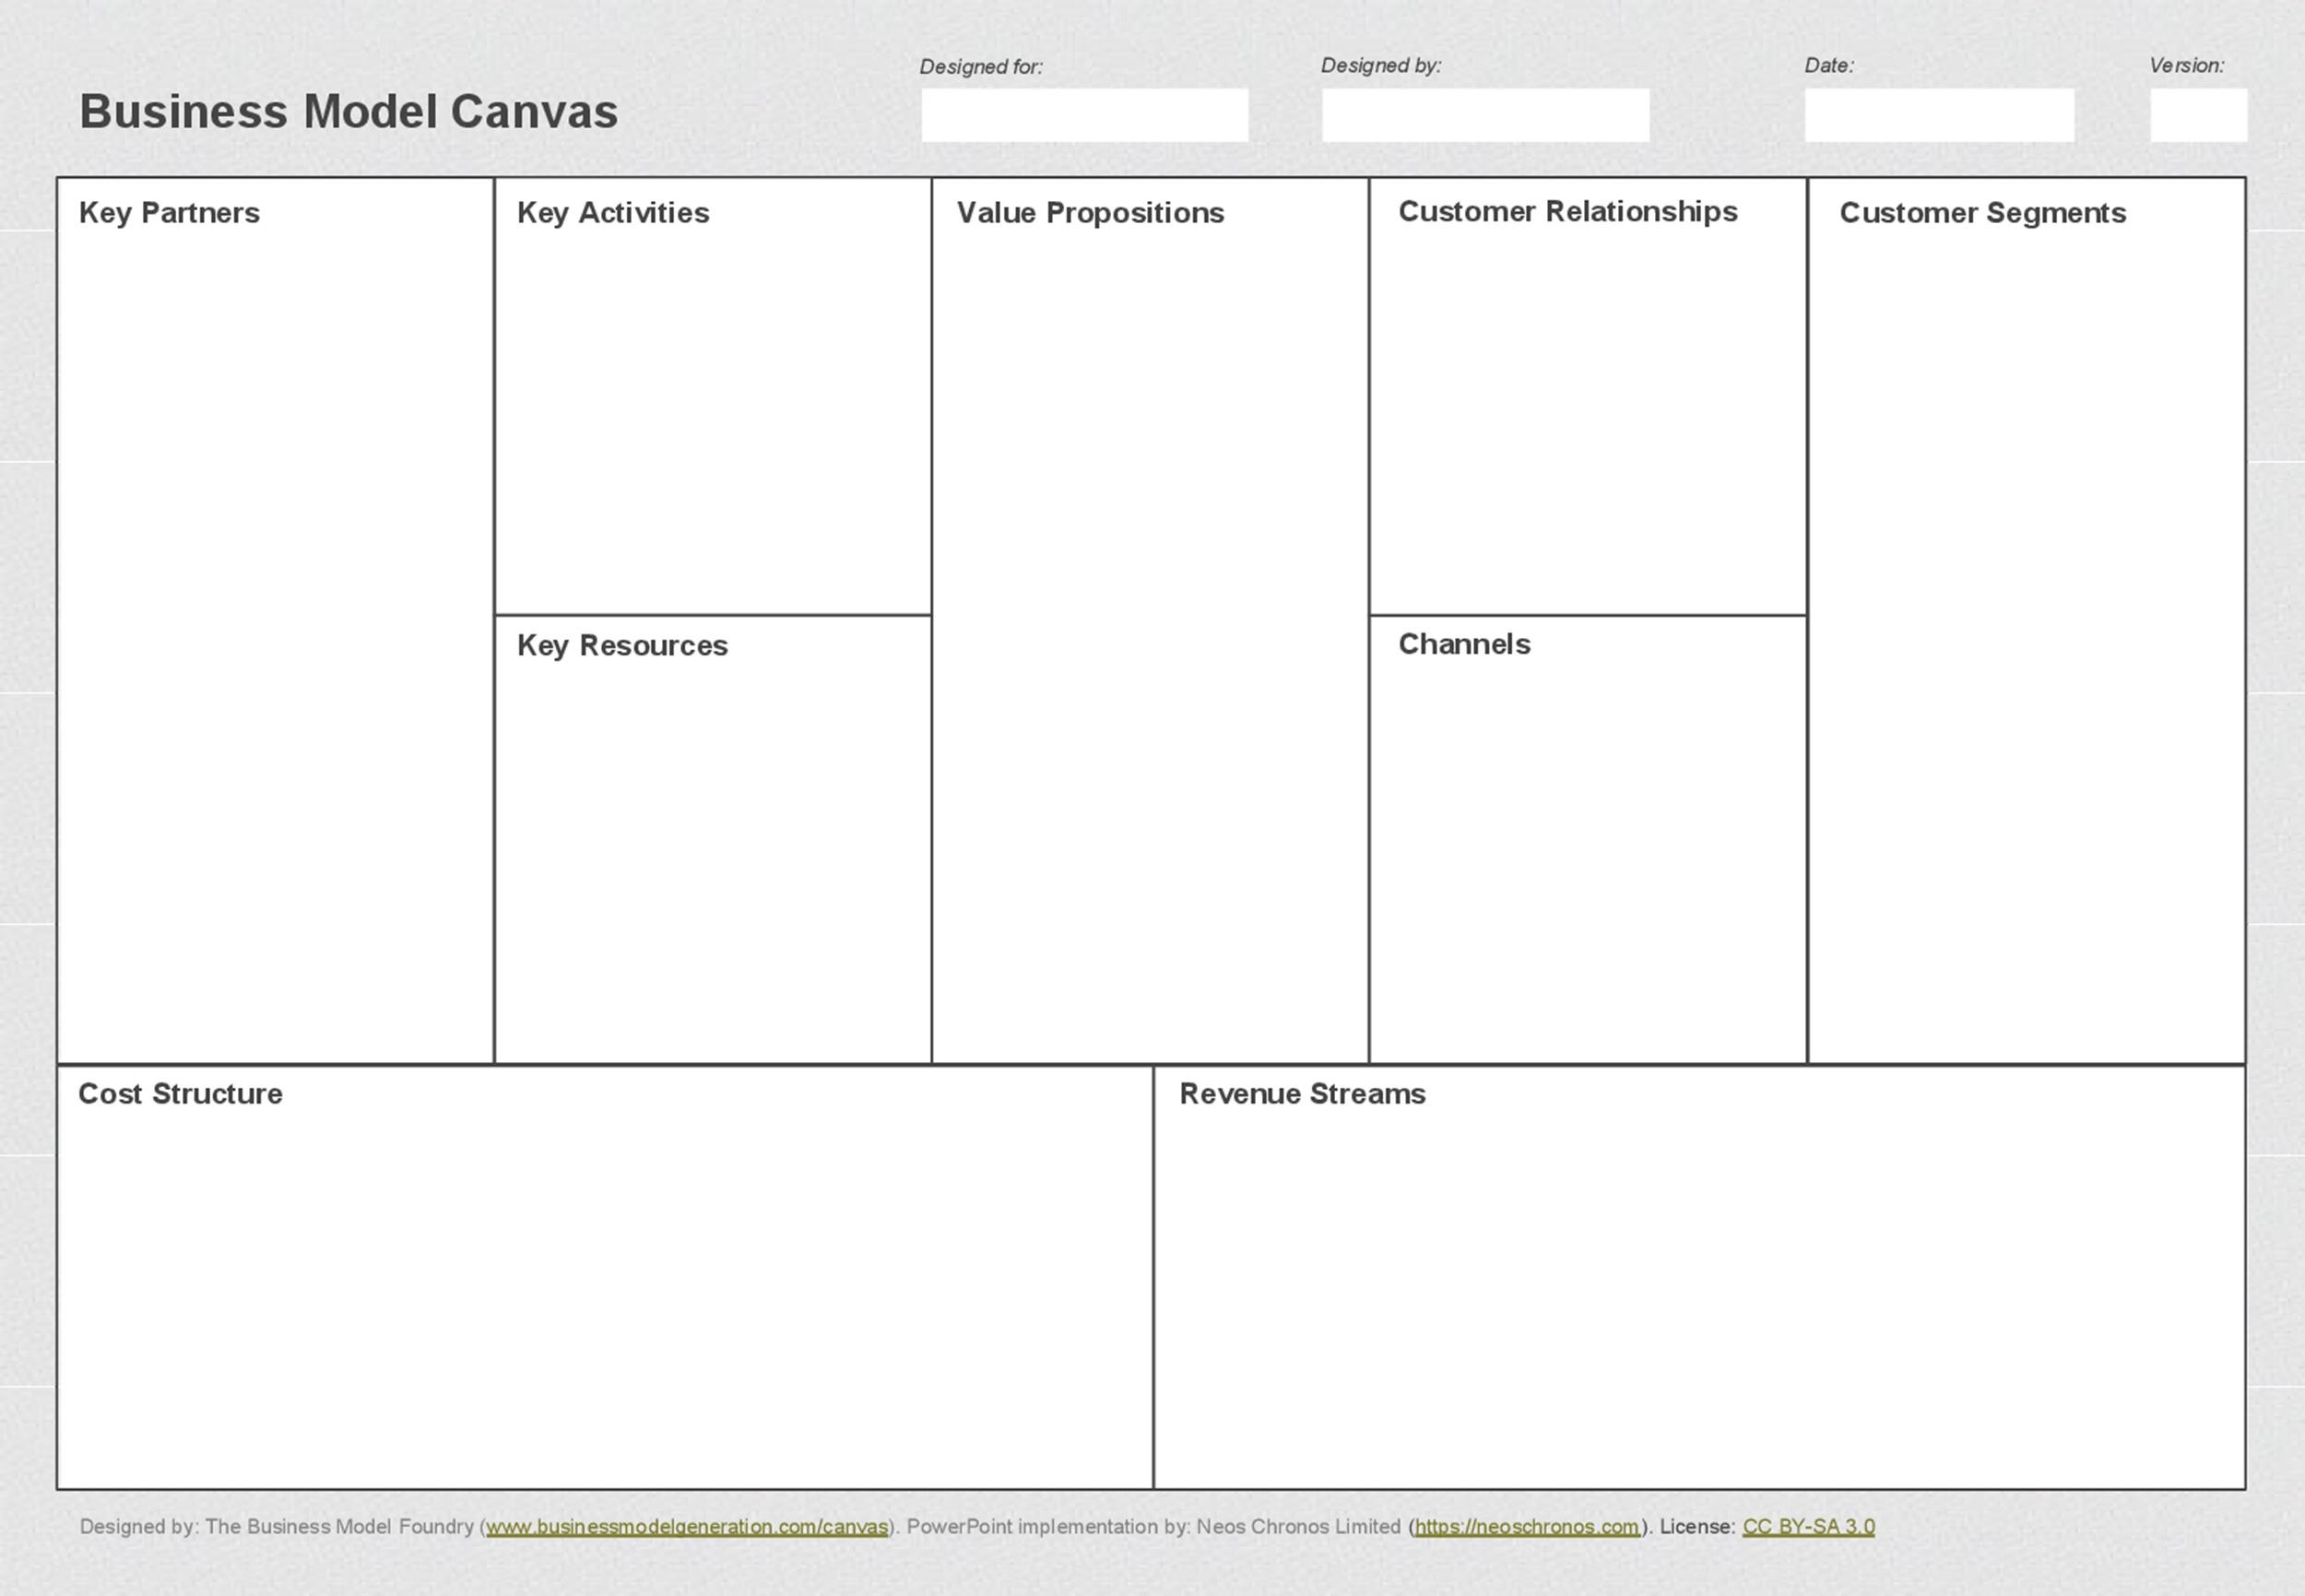 image-result-for-the-business-model-canvas-pdf-business-model-canvas